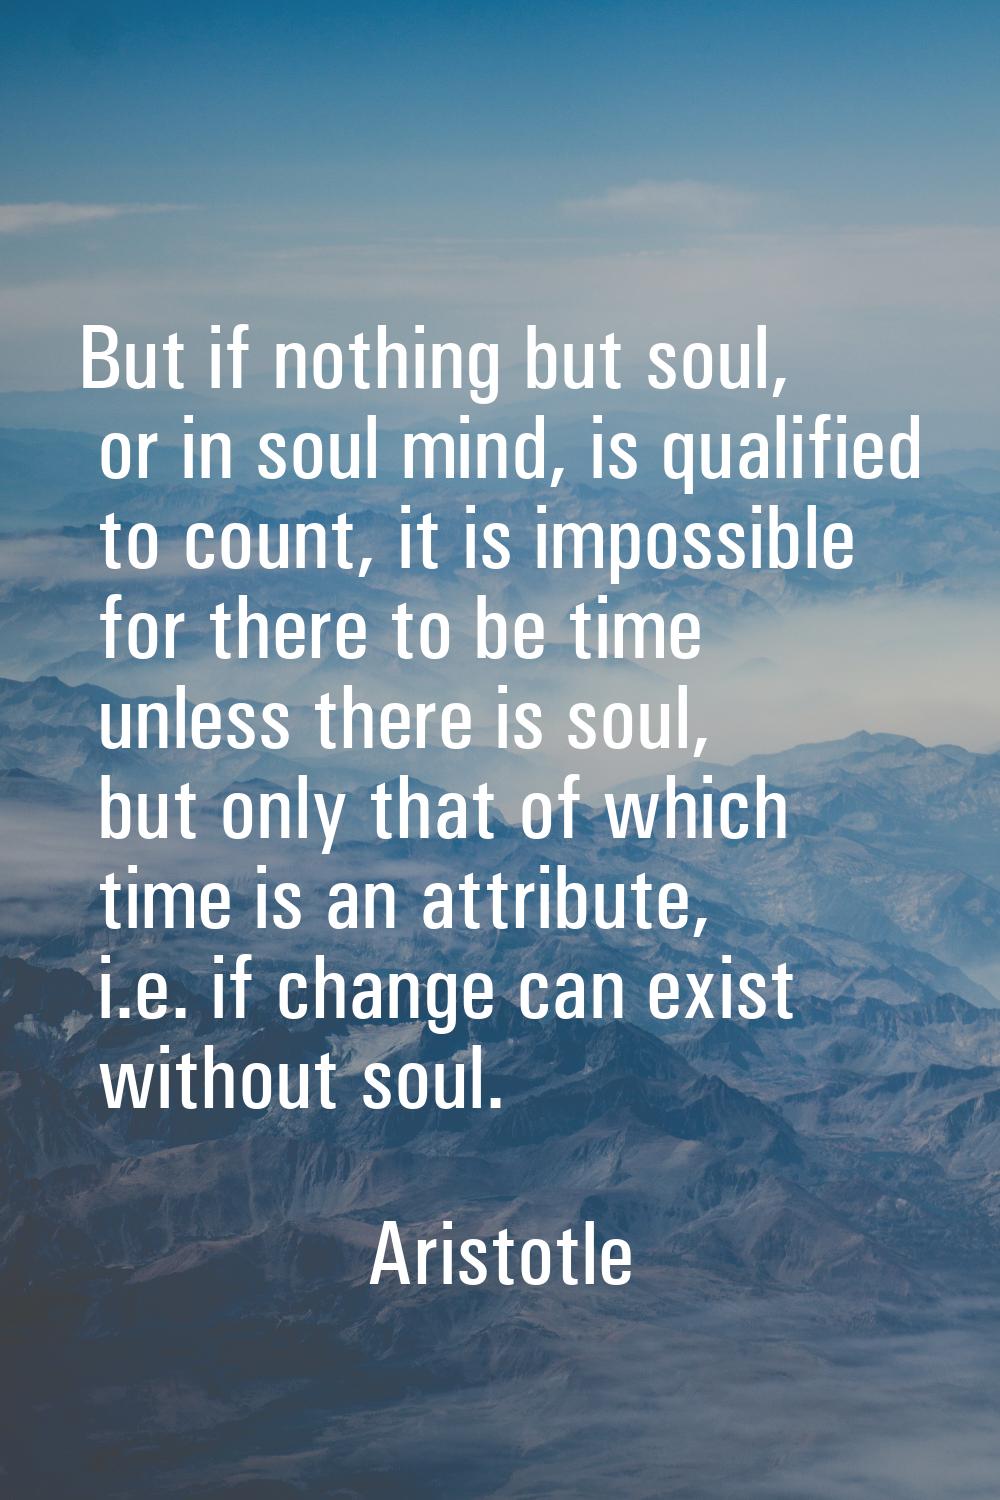 But if nothing but soul, or in soul mind, is qualified to count, it is impossible for there to be t